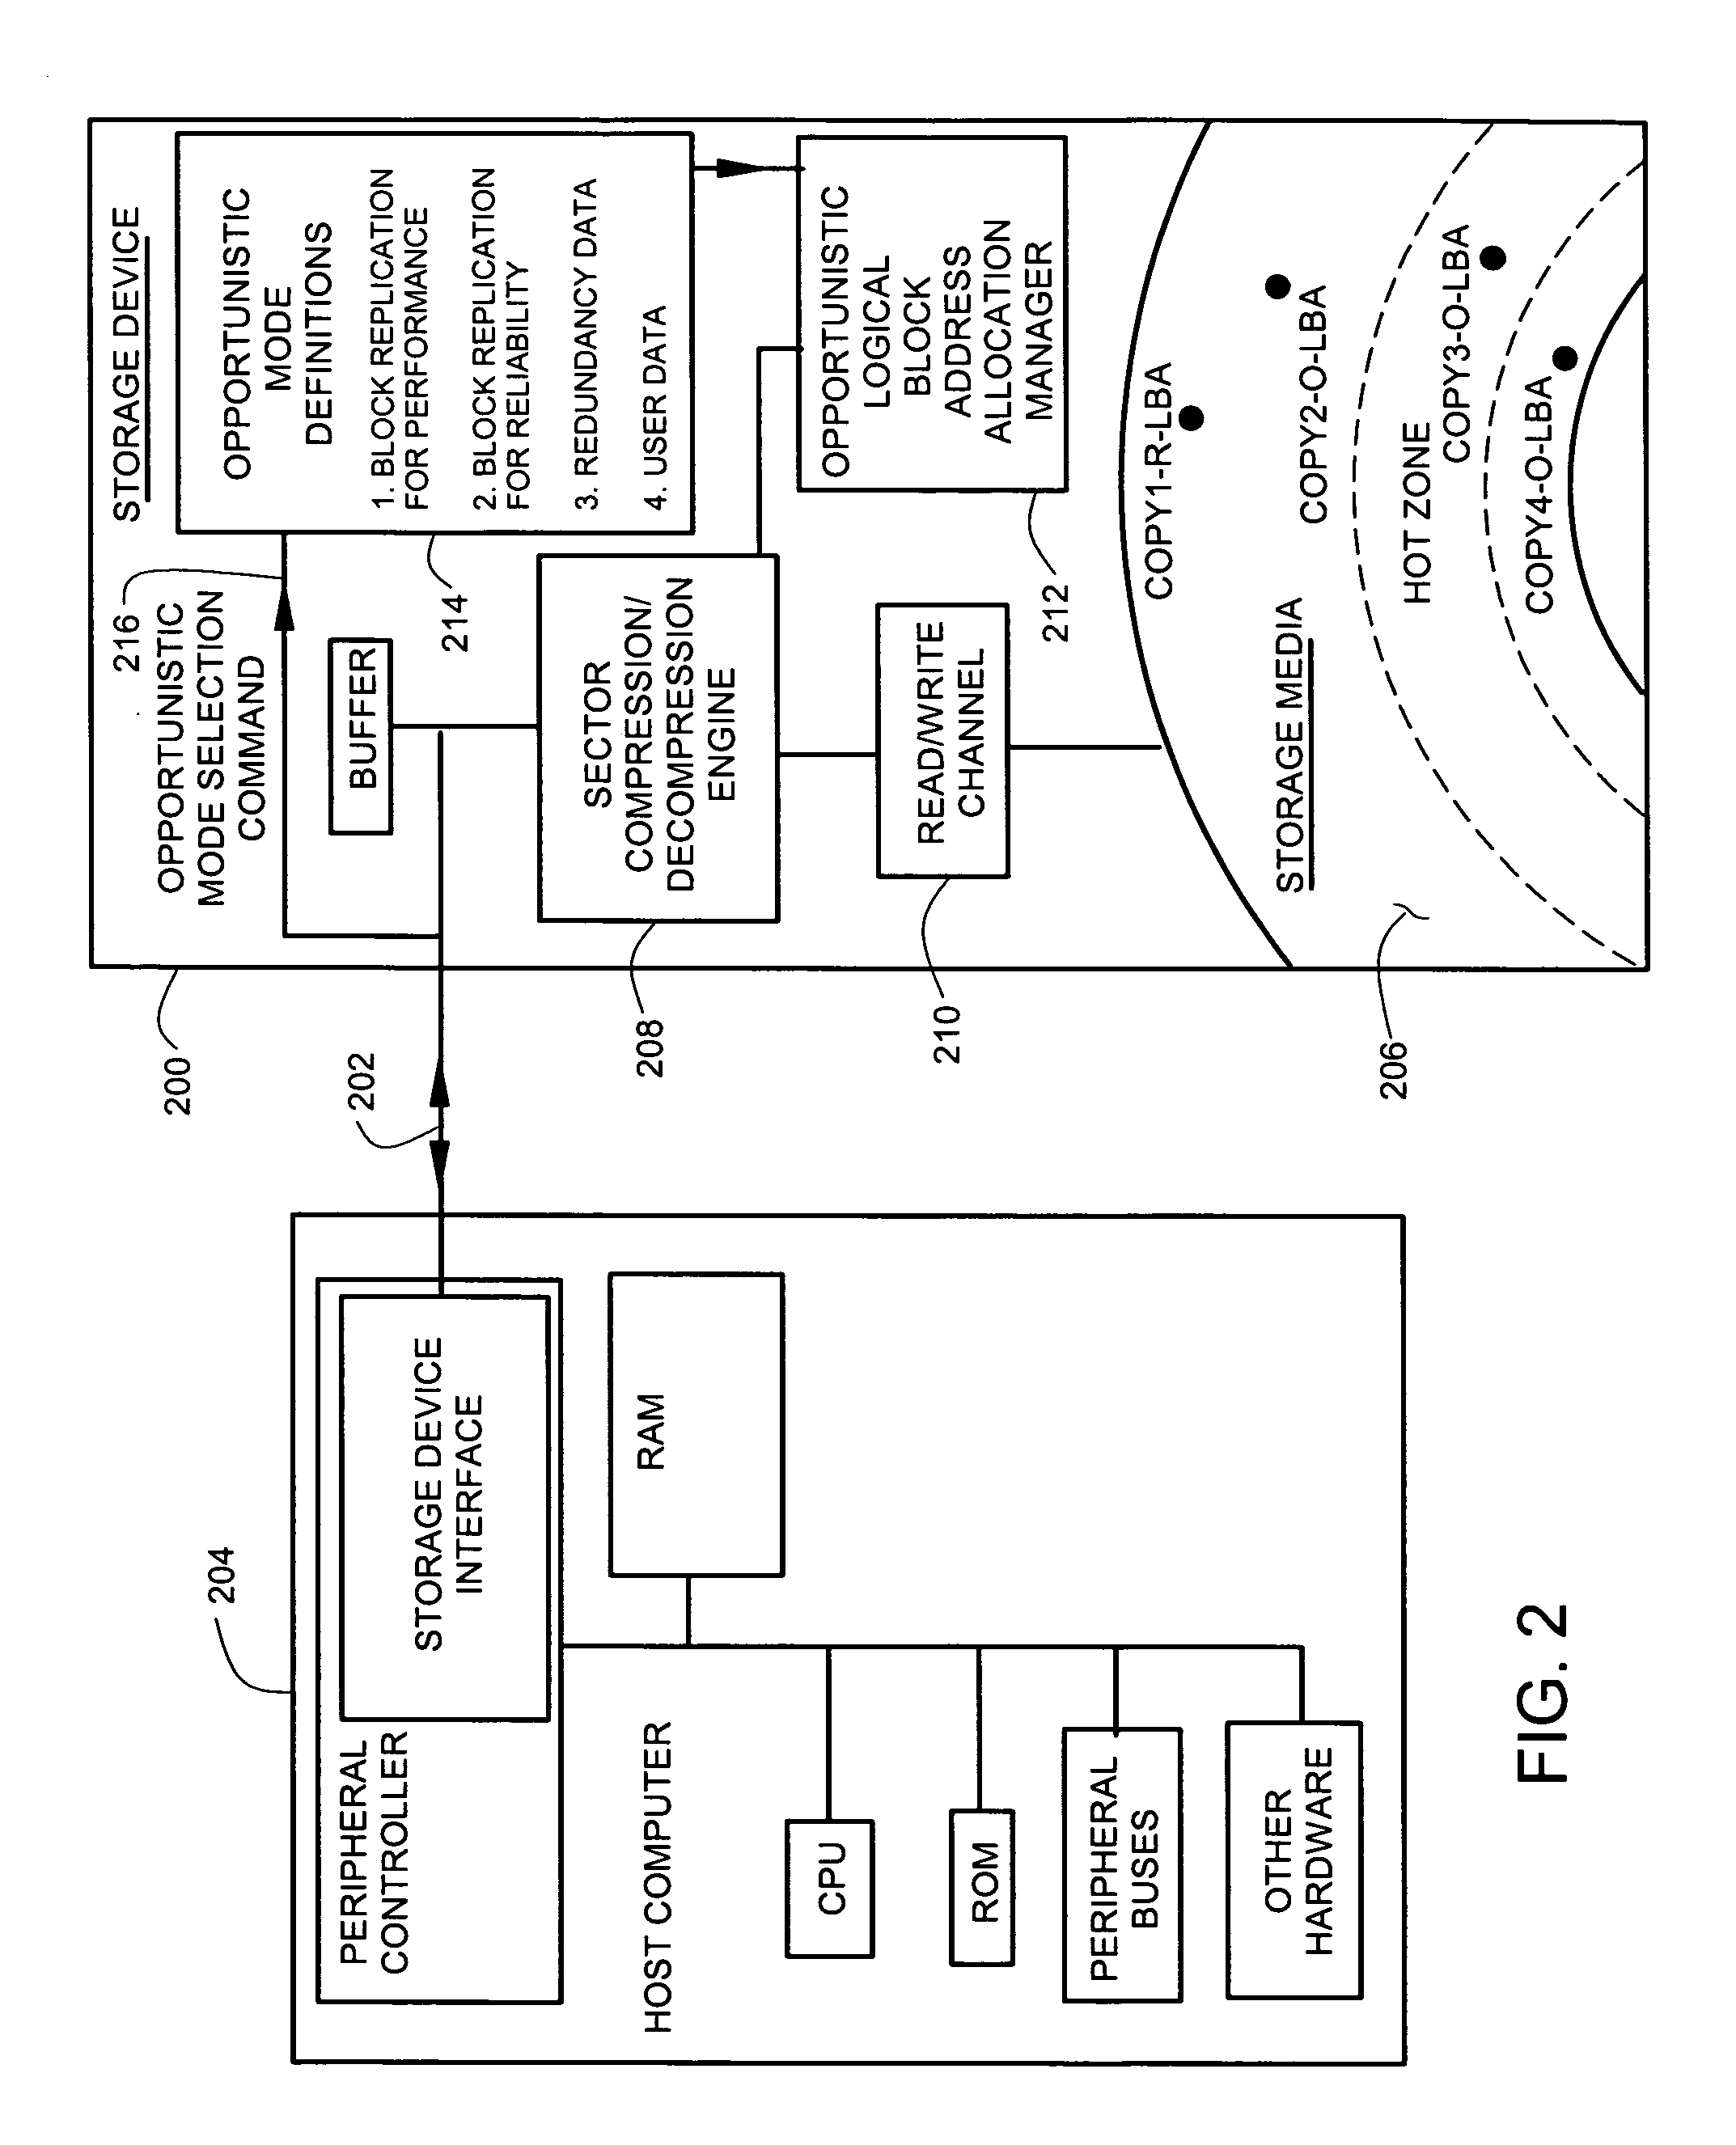 Storage device with opportunistic address space